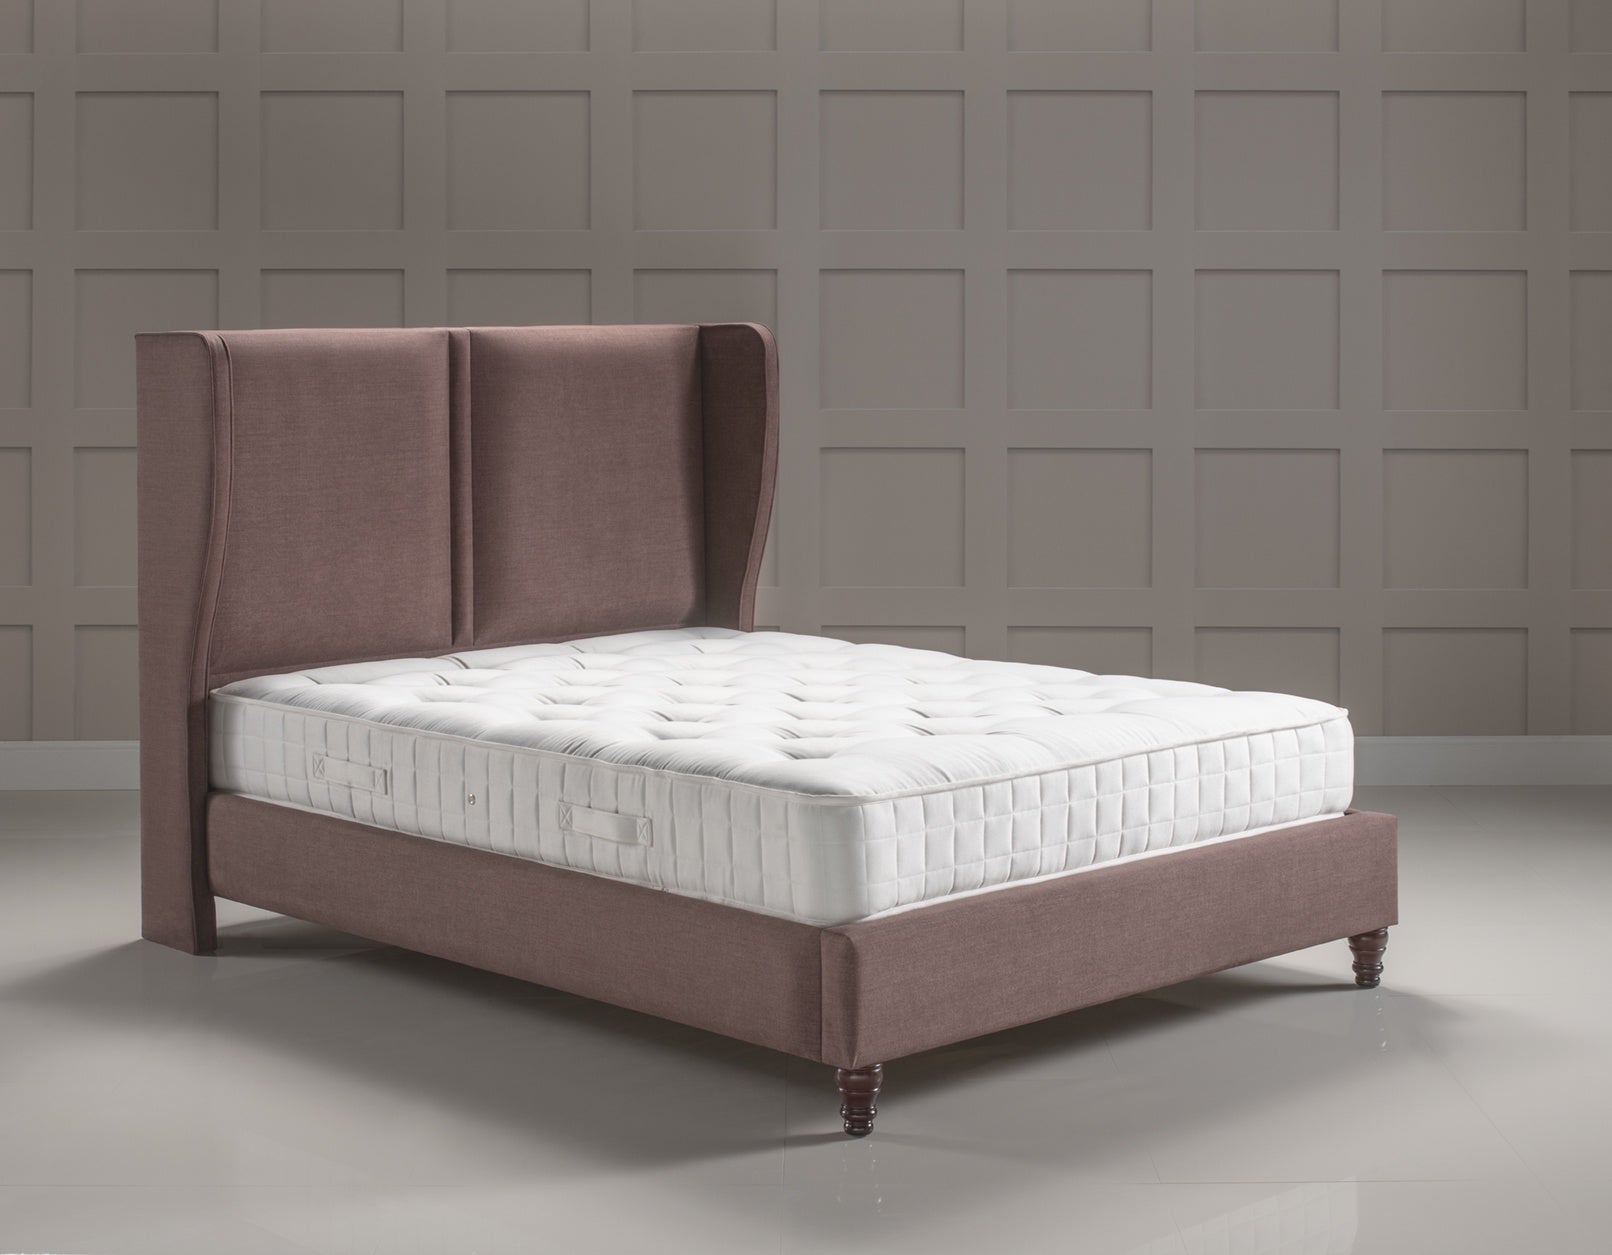 The Ardmore Upholstered Bed